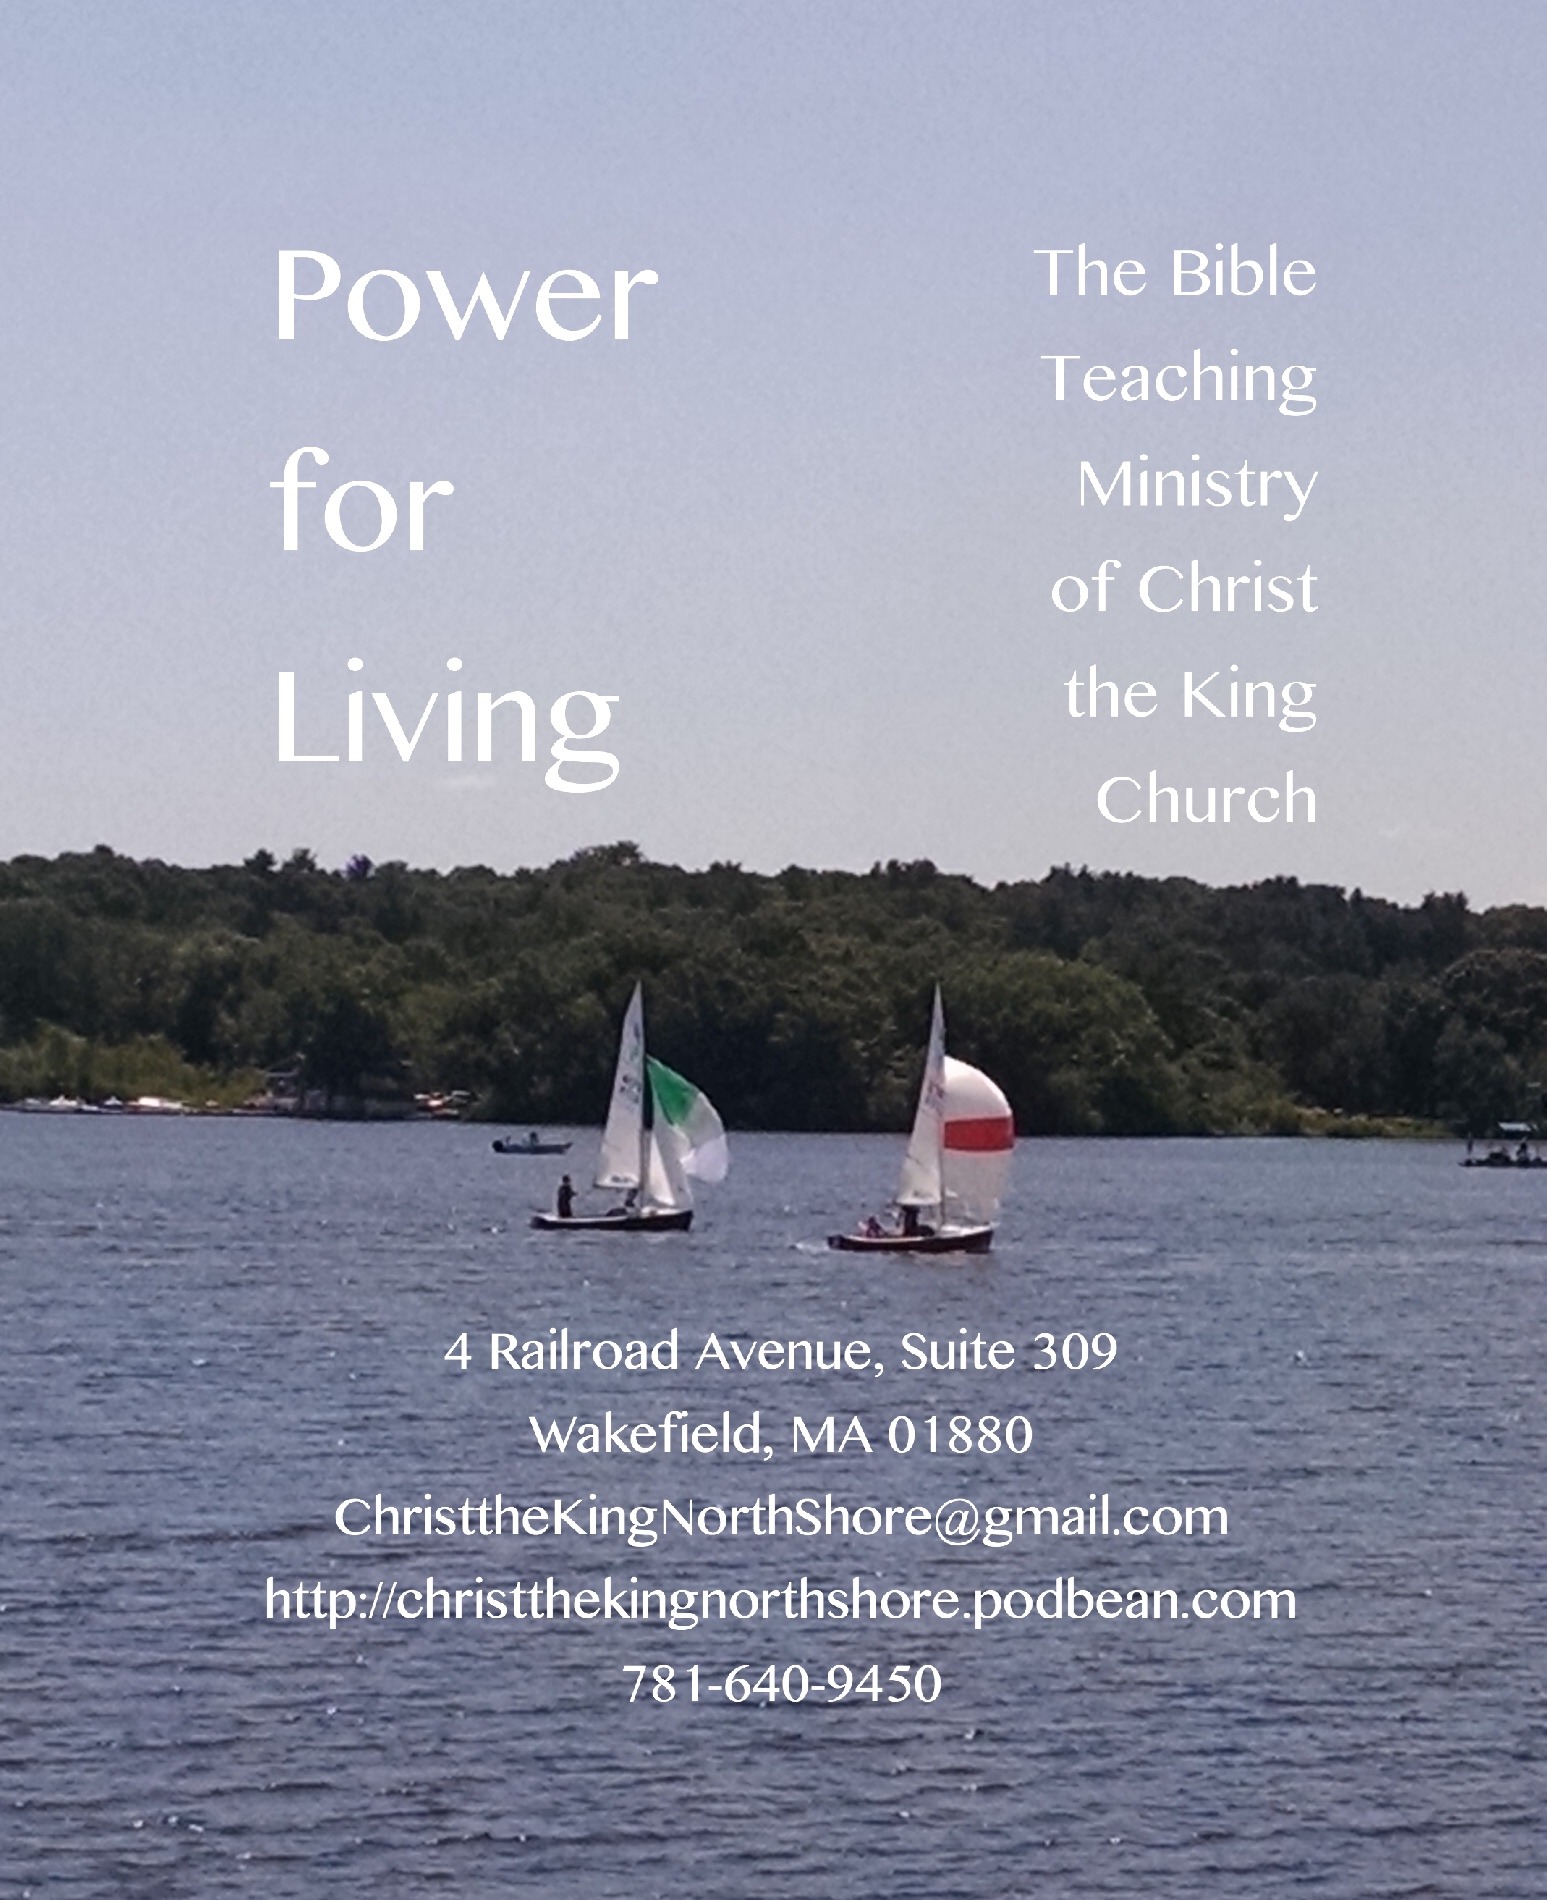 Power for Living, Episode 160515, Character Counts